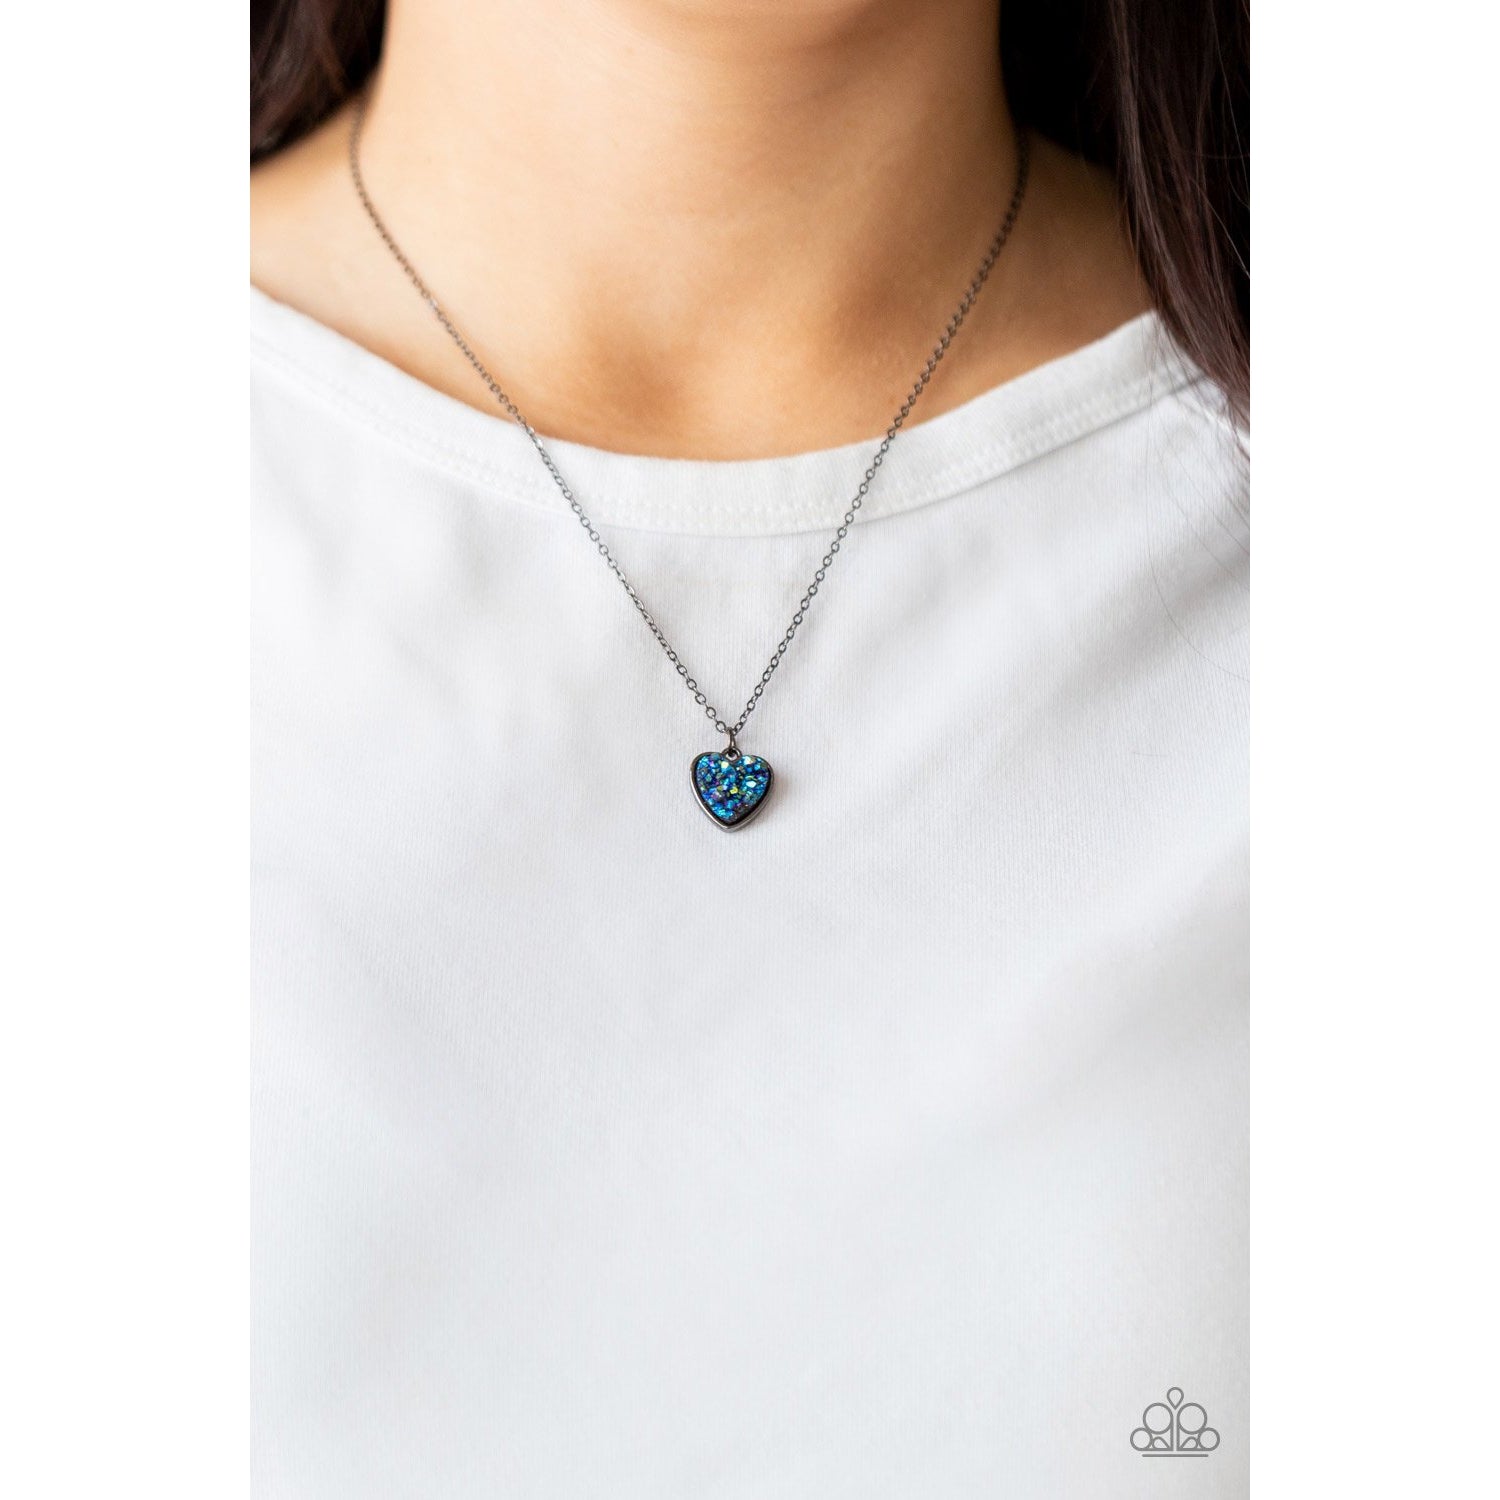 Pitter-Patter, Goes My Heart - Glittery Blue Necklace - Paparazzi Accessories - GlaMarous Titi Jewels